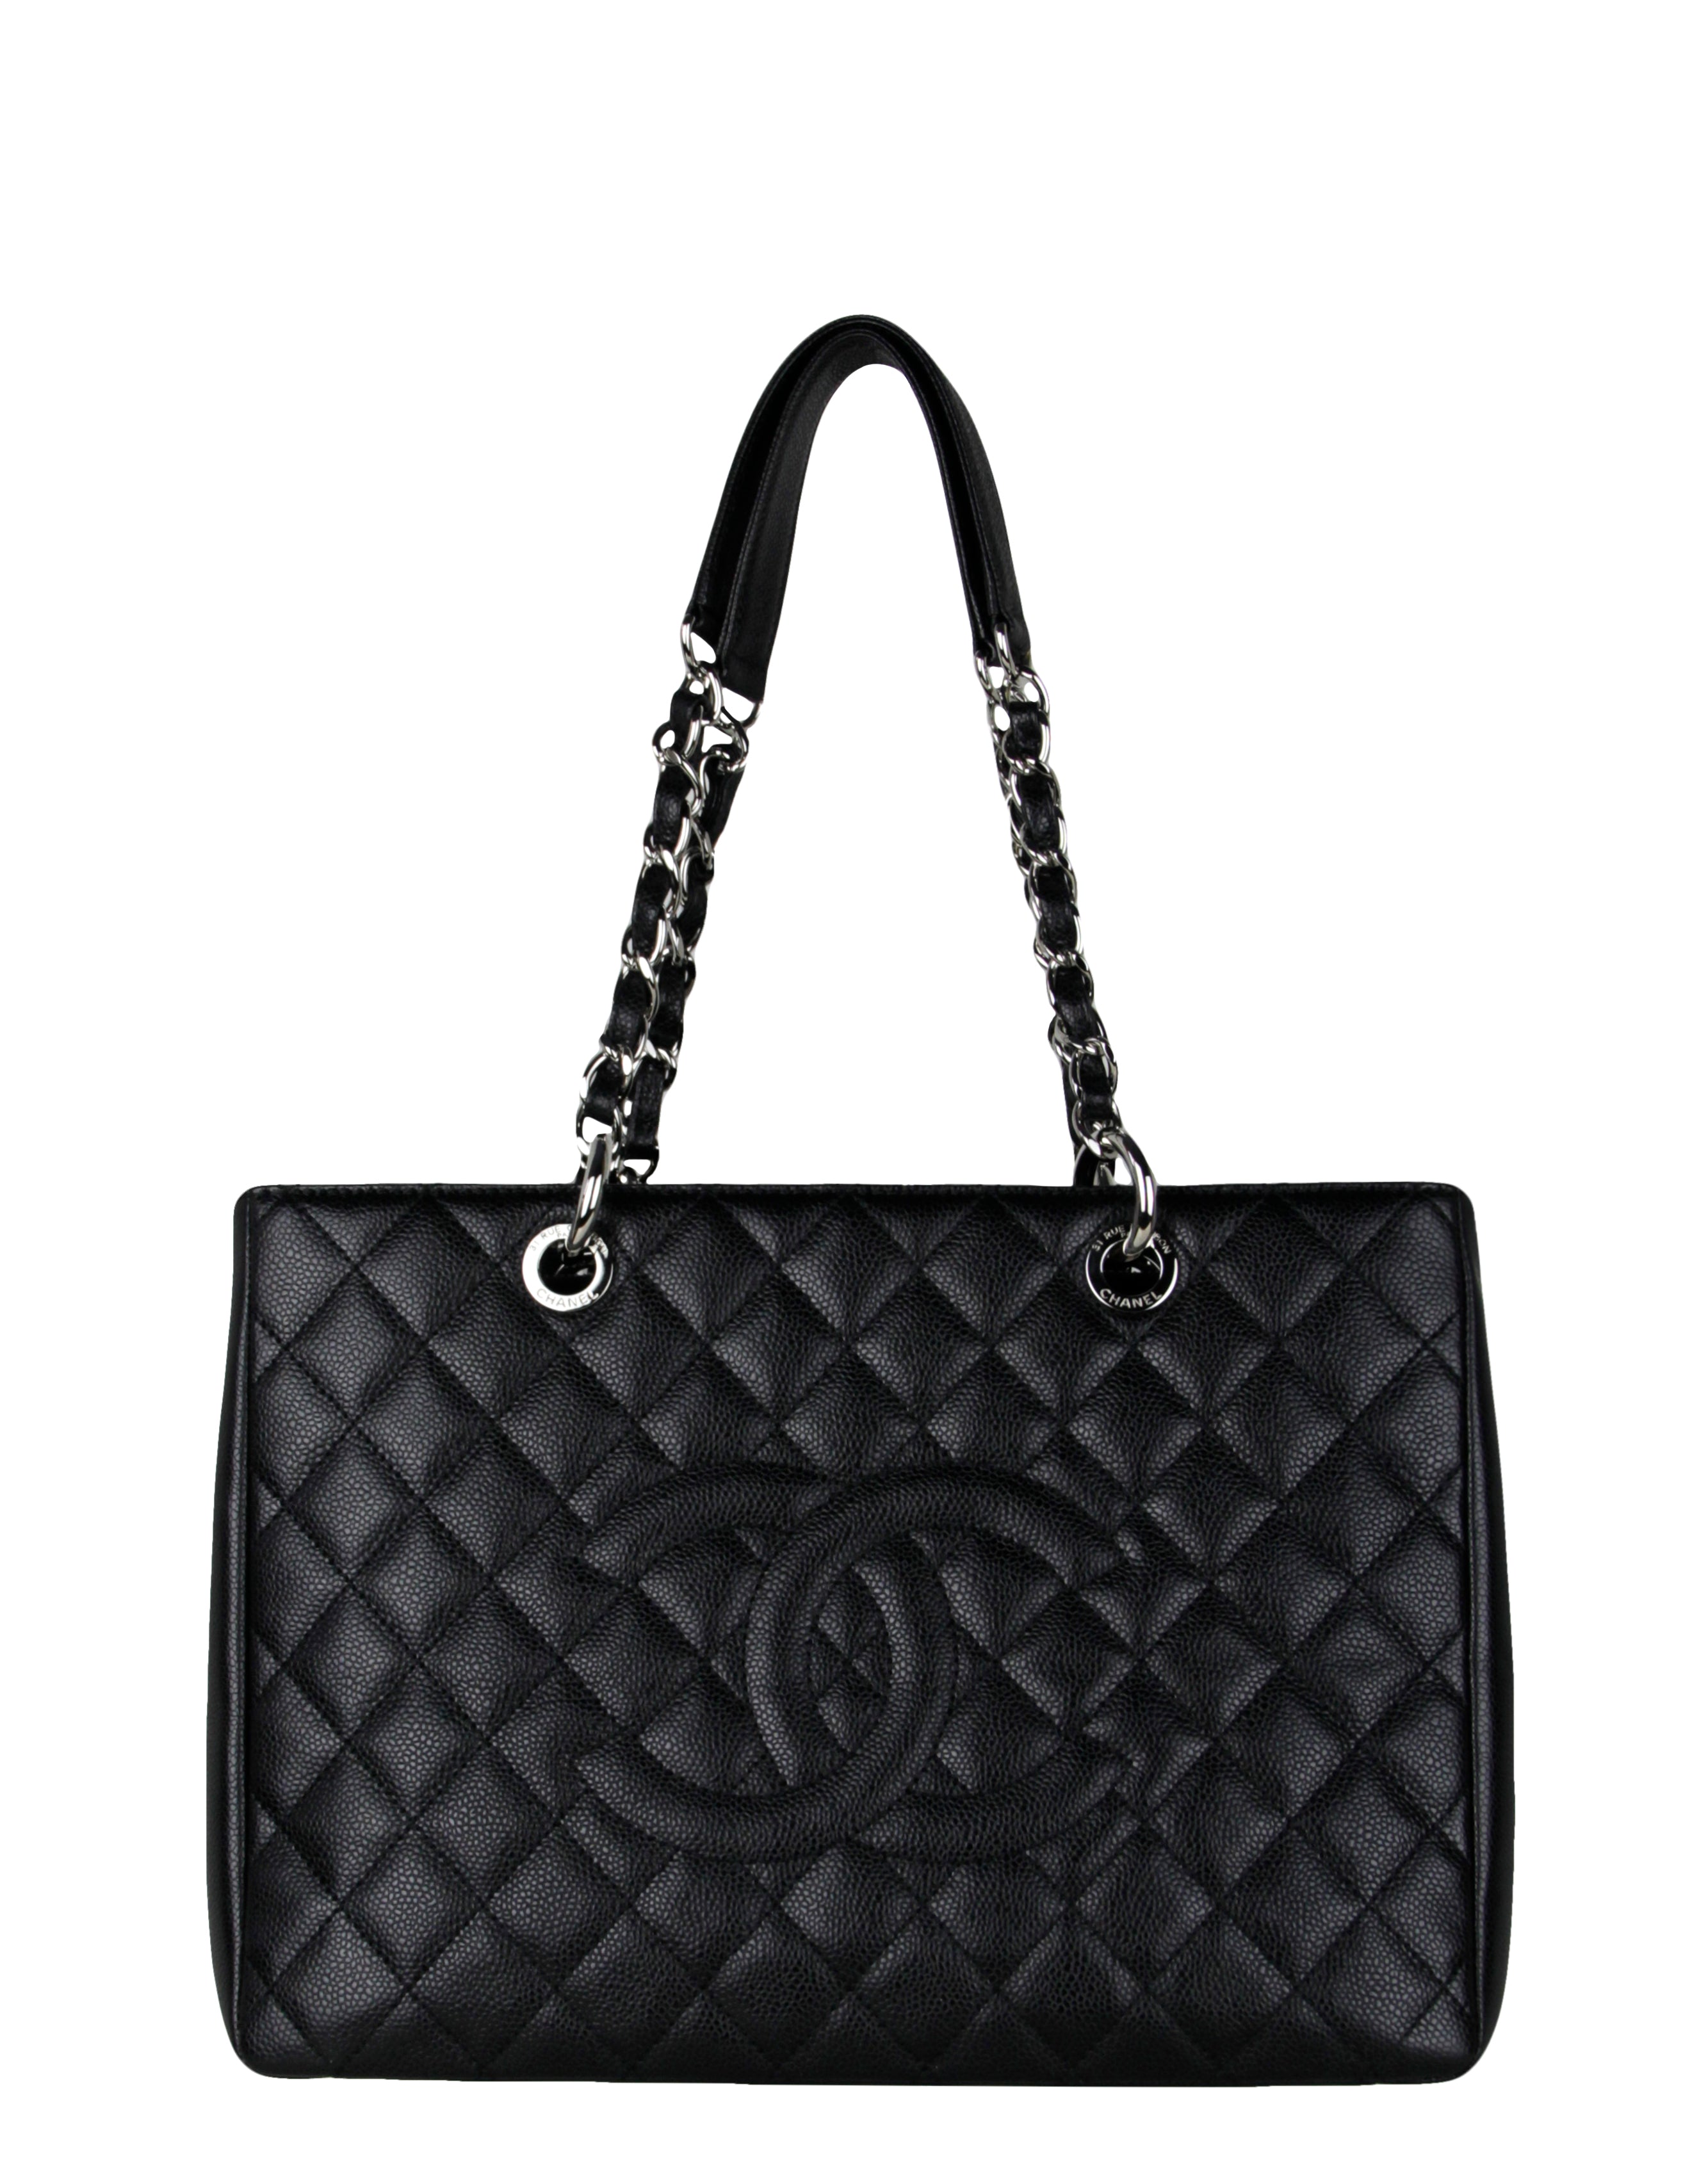 Chanel Black Caviar Leather Quilted Grand Shopper Tote GST Bag